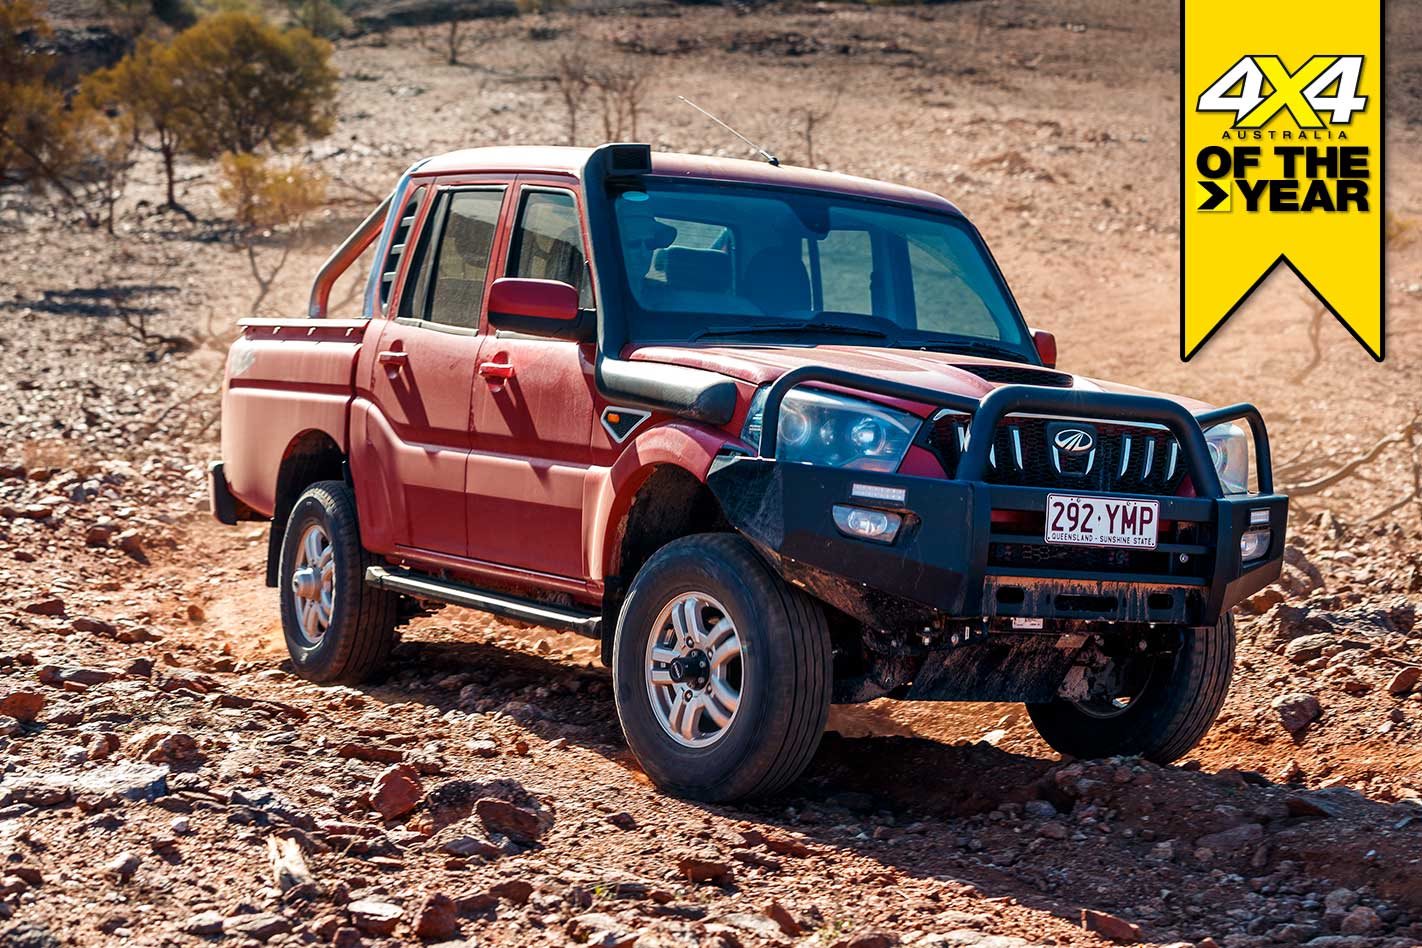 Mahindra Pik Up S10 Review 4x4 Of The Year 2019